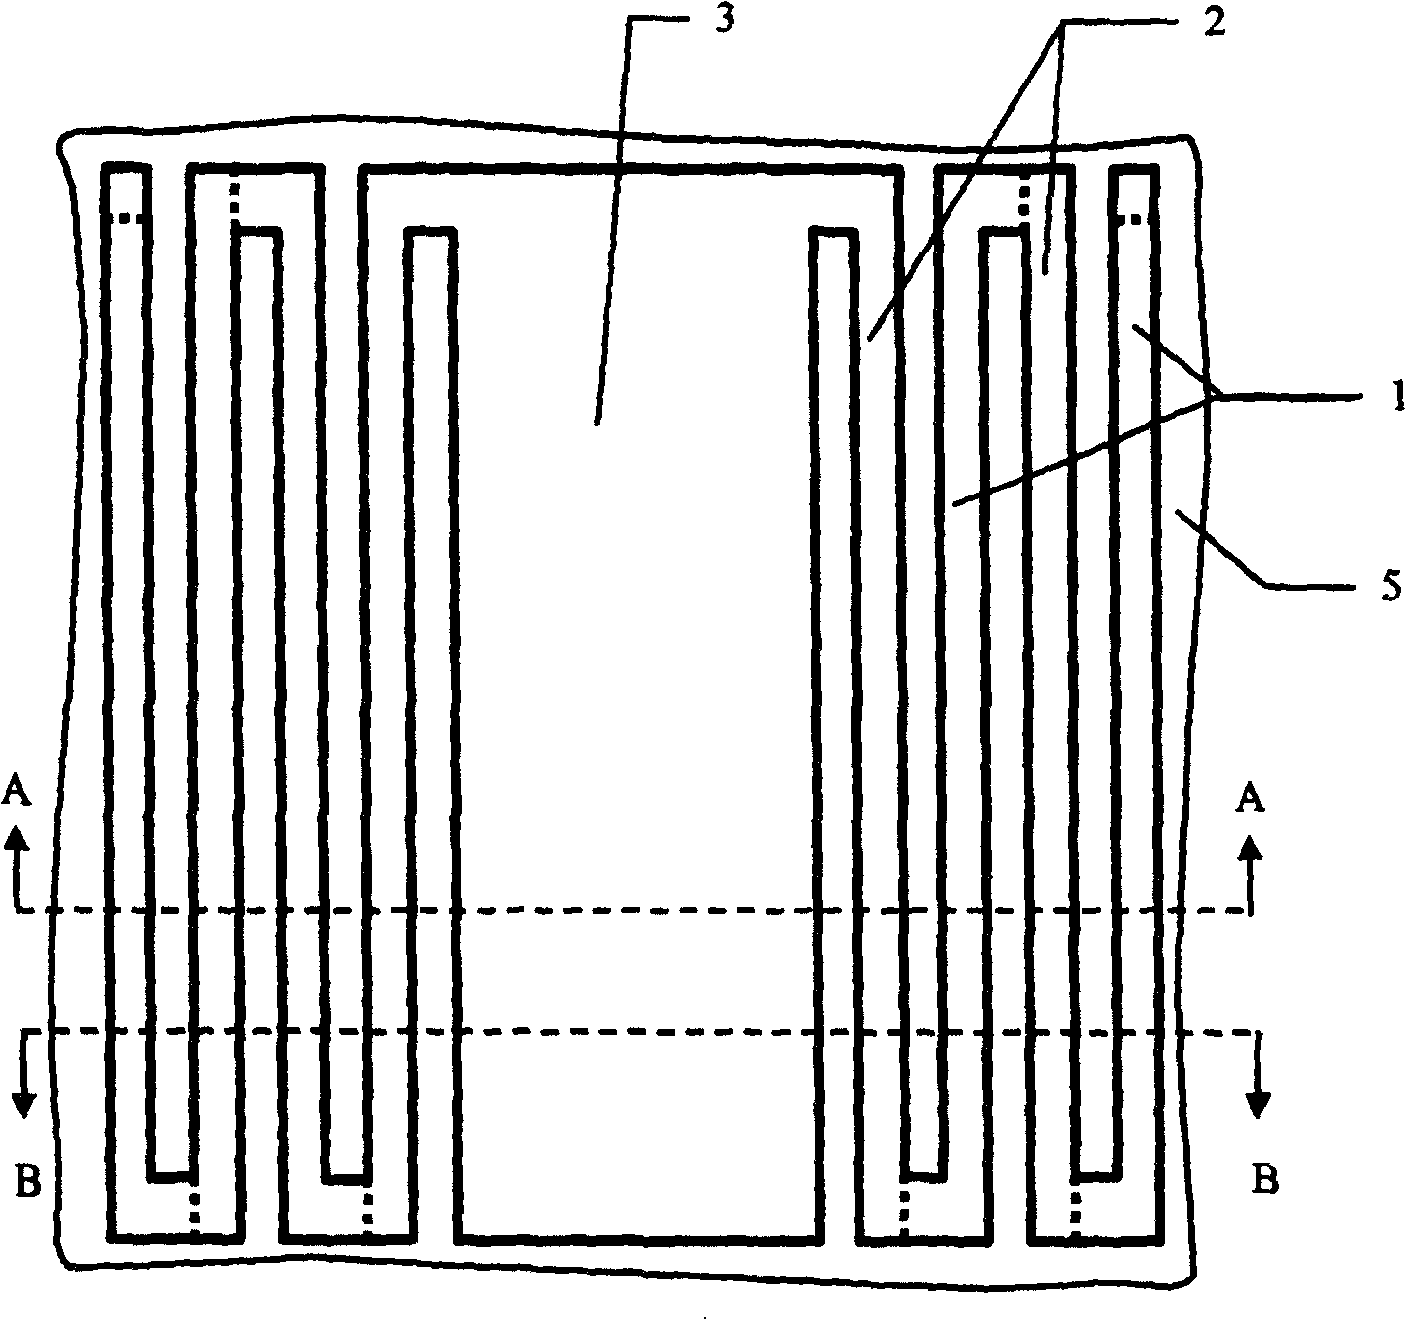 Glass substrate optical display infra-red sensor